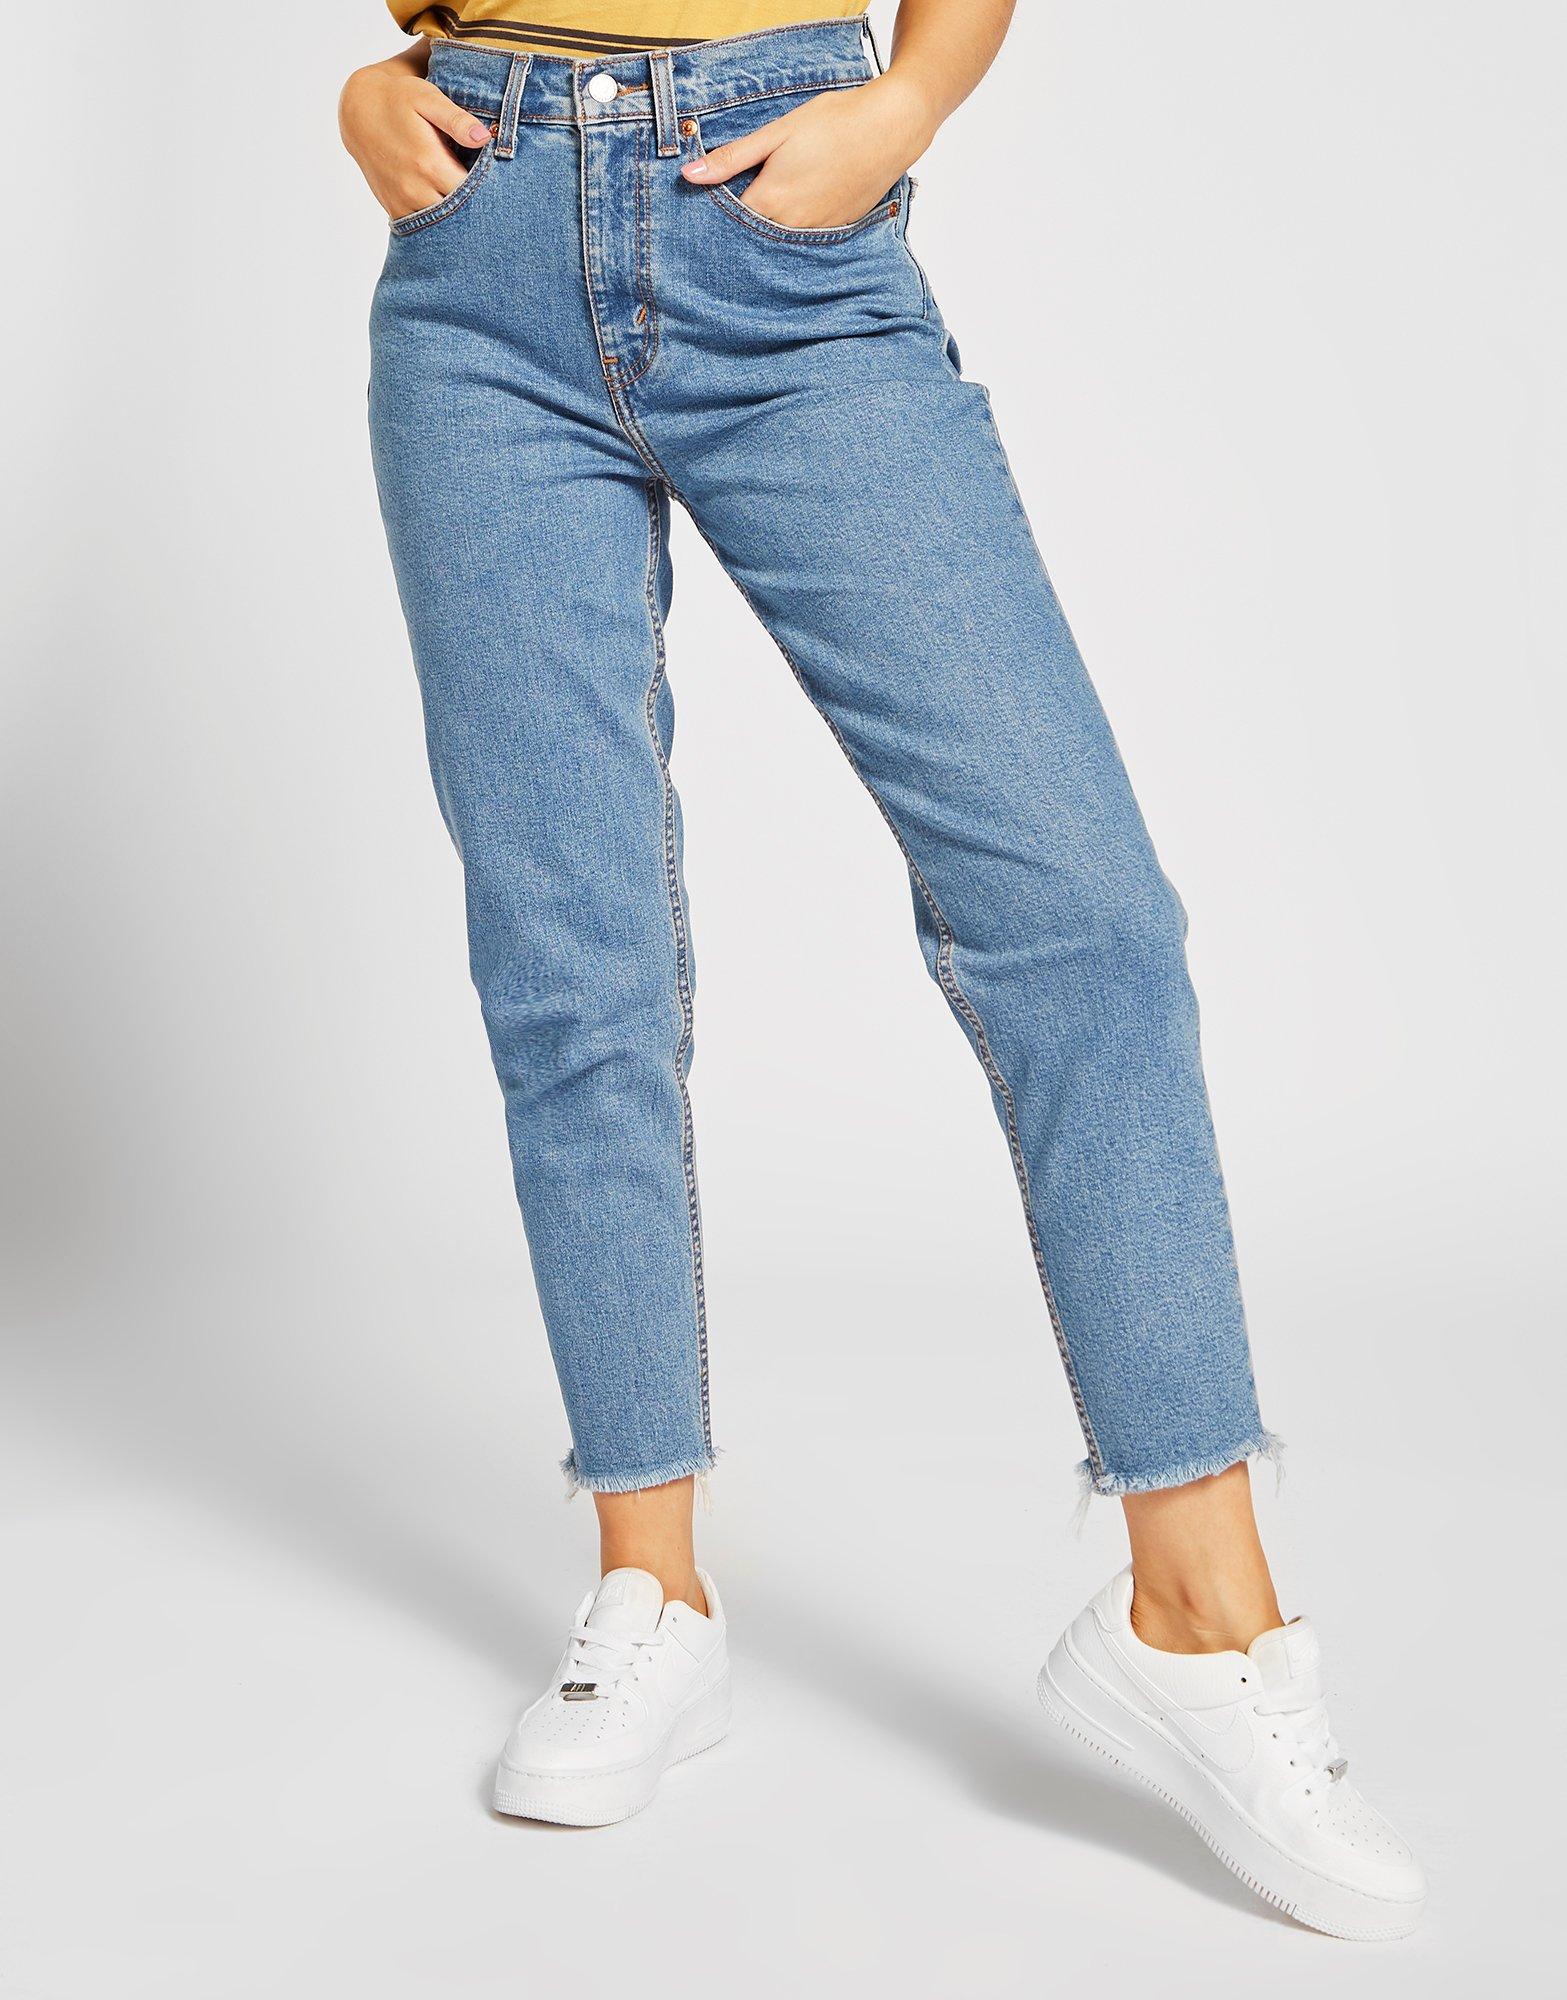 mom fit jeans levis